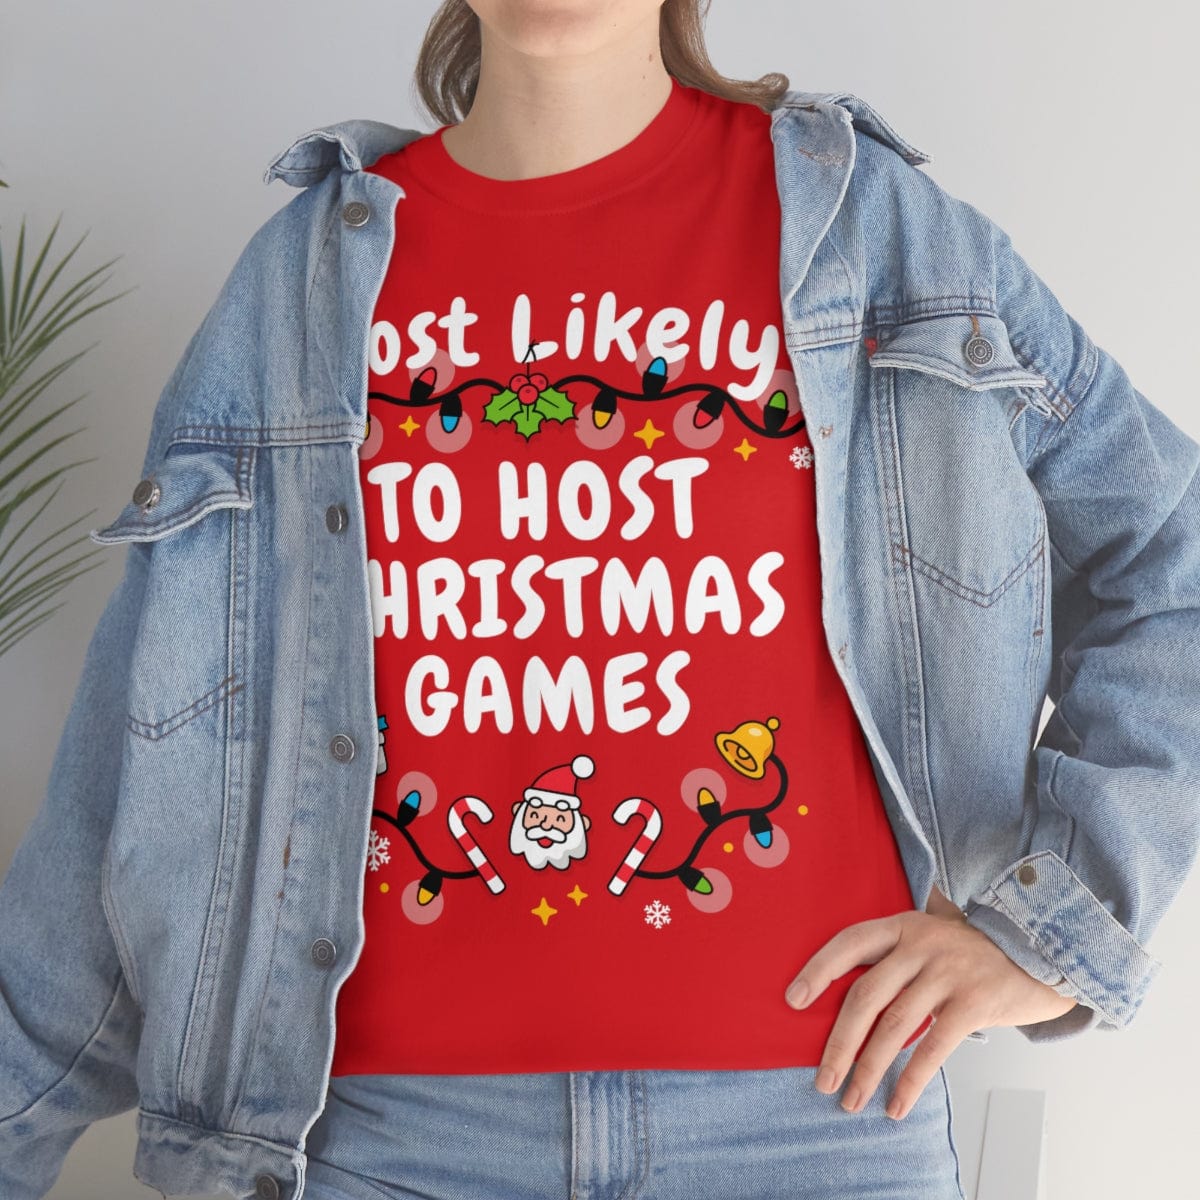 TO HOST CHRISTMAS GAMES